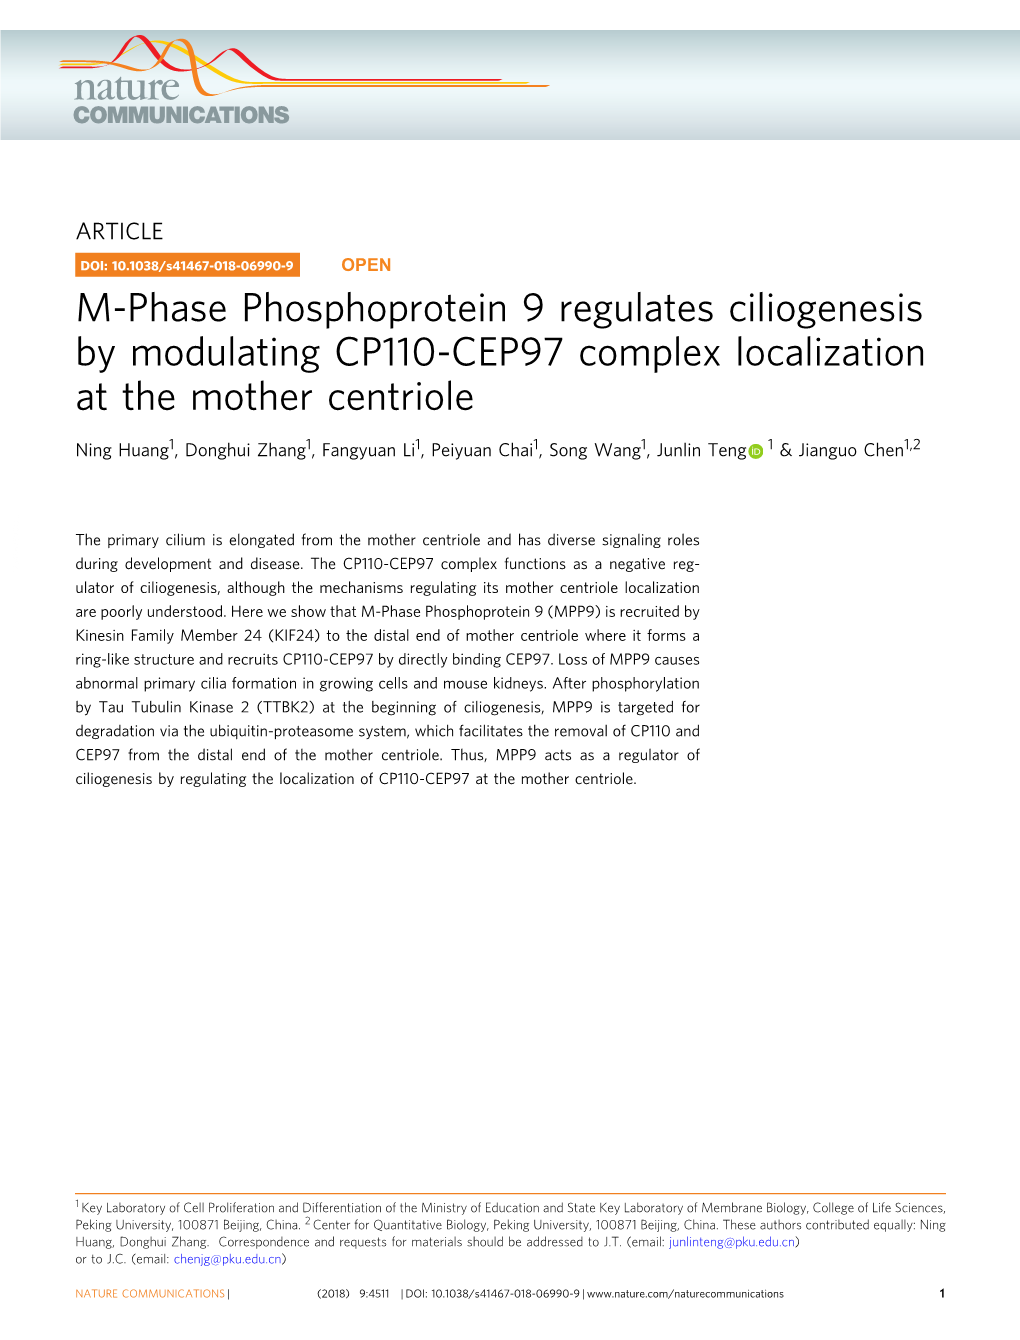 M-Phase Phosphoprotein 9 Regulates Ciliogenesis by Modulating CP110-CEP97 Complex Localization at the Mother Centriole